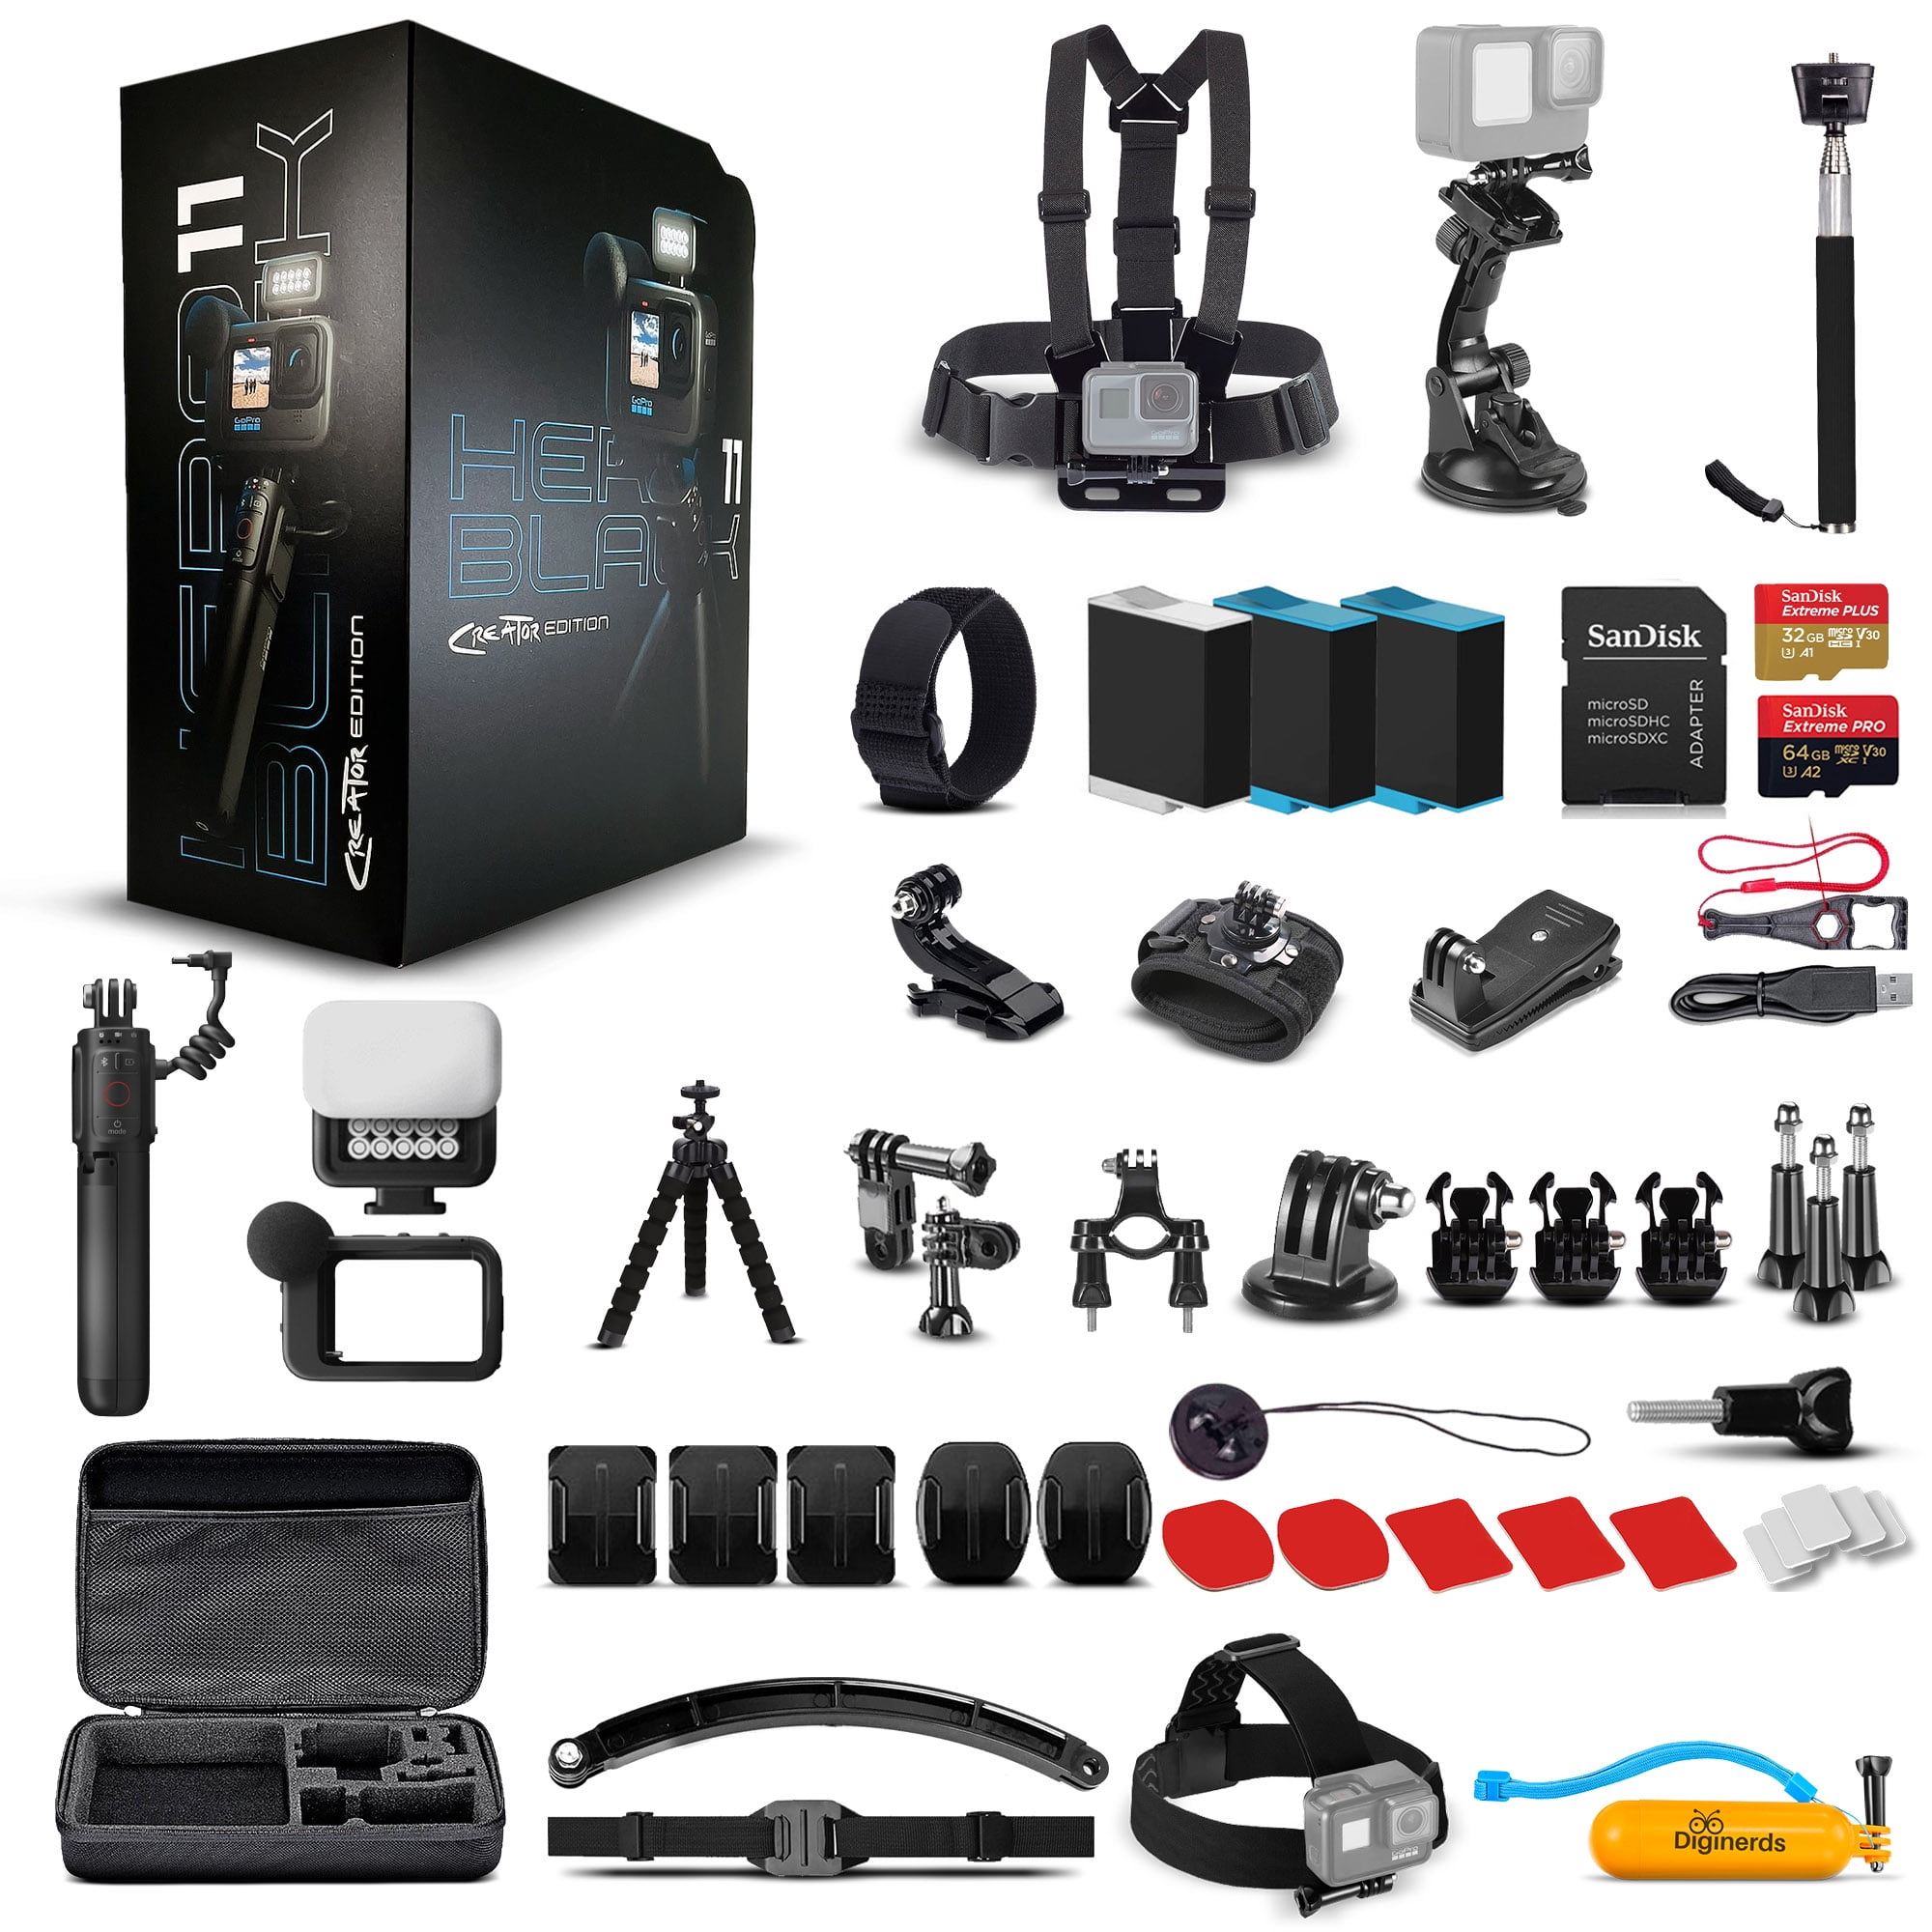 GoPro HERO11 (HERO 11) Black Creator Edition - Includes Volta (Battery  Grip, Tripod, Remote), Media Mod, Light Mod, - Waterproof Action Camera +  64GB Card, 50 Piece Accessory Kit and 2 Extra Batteries